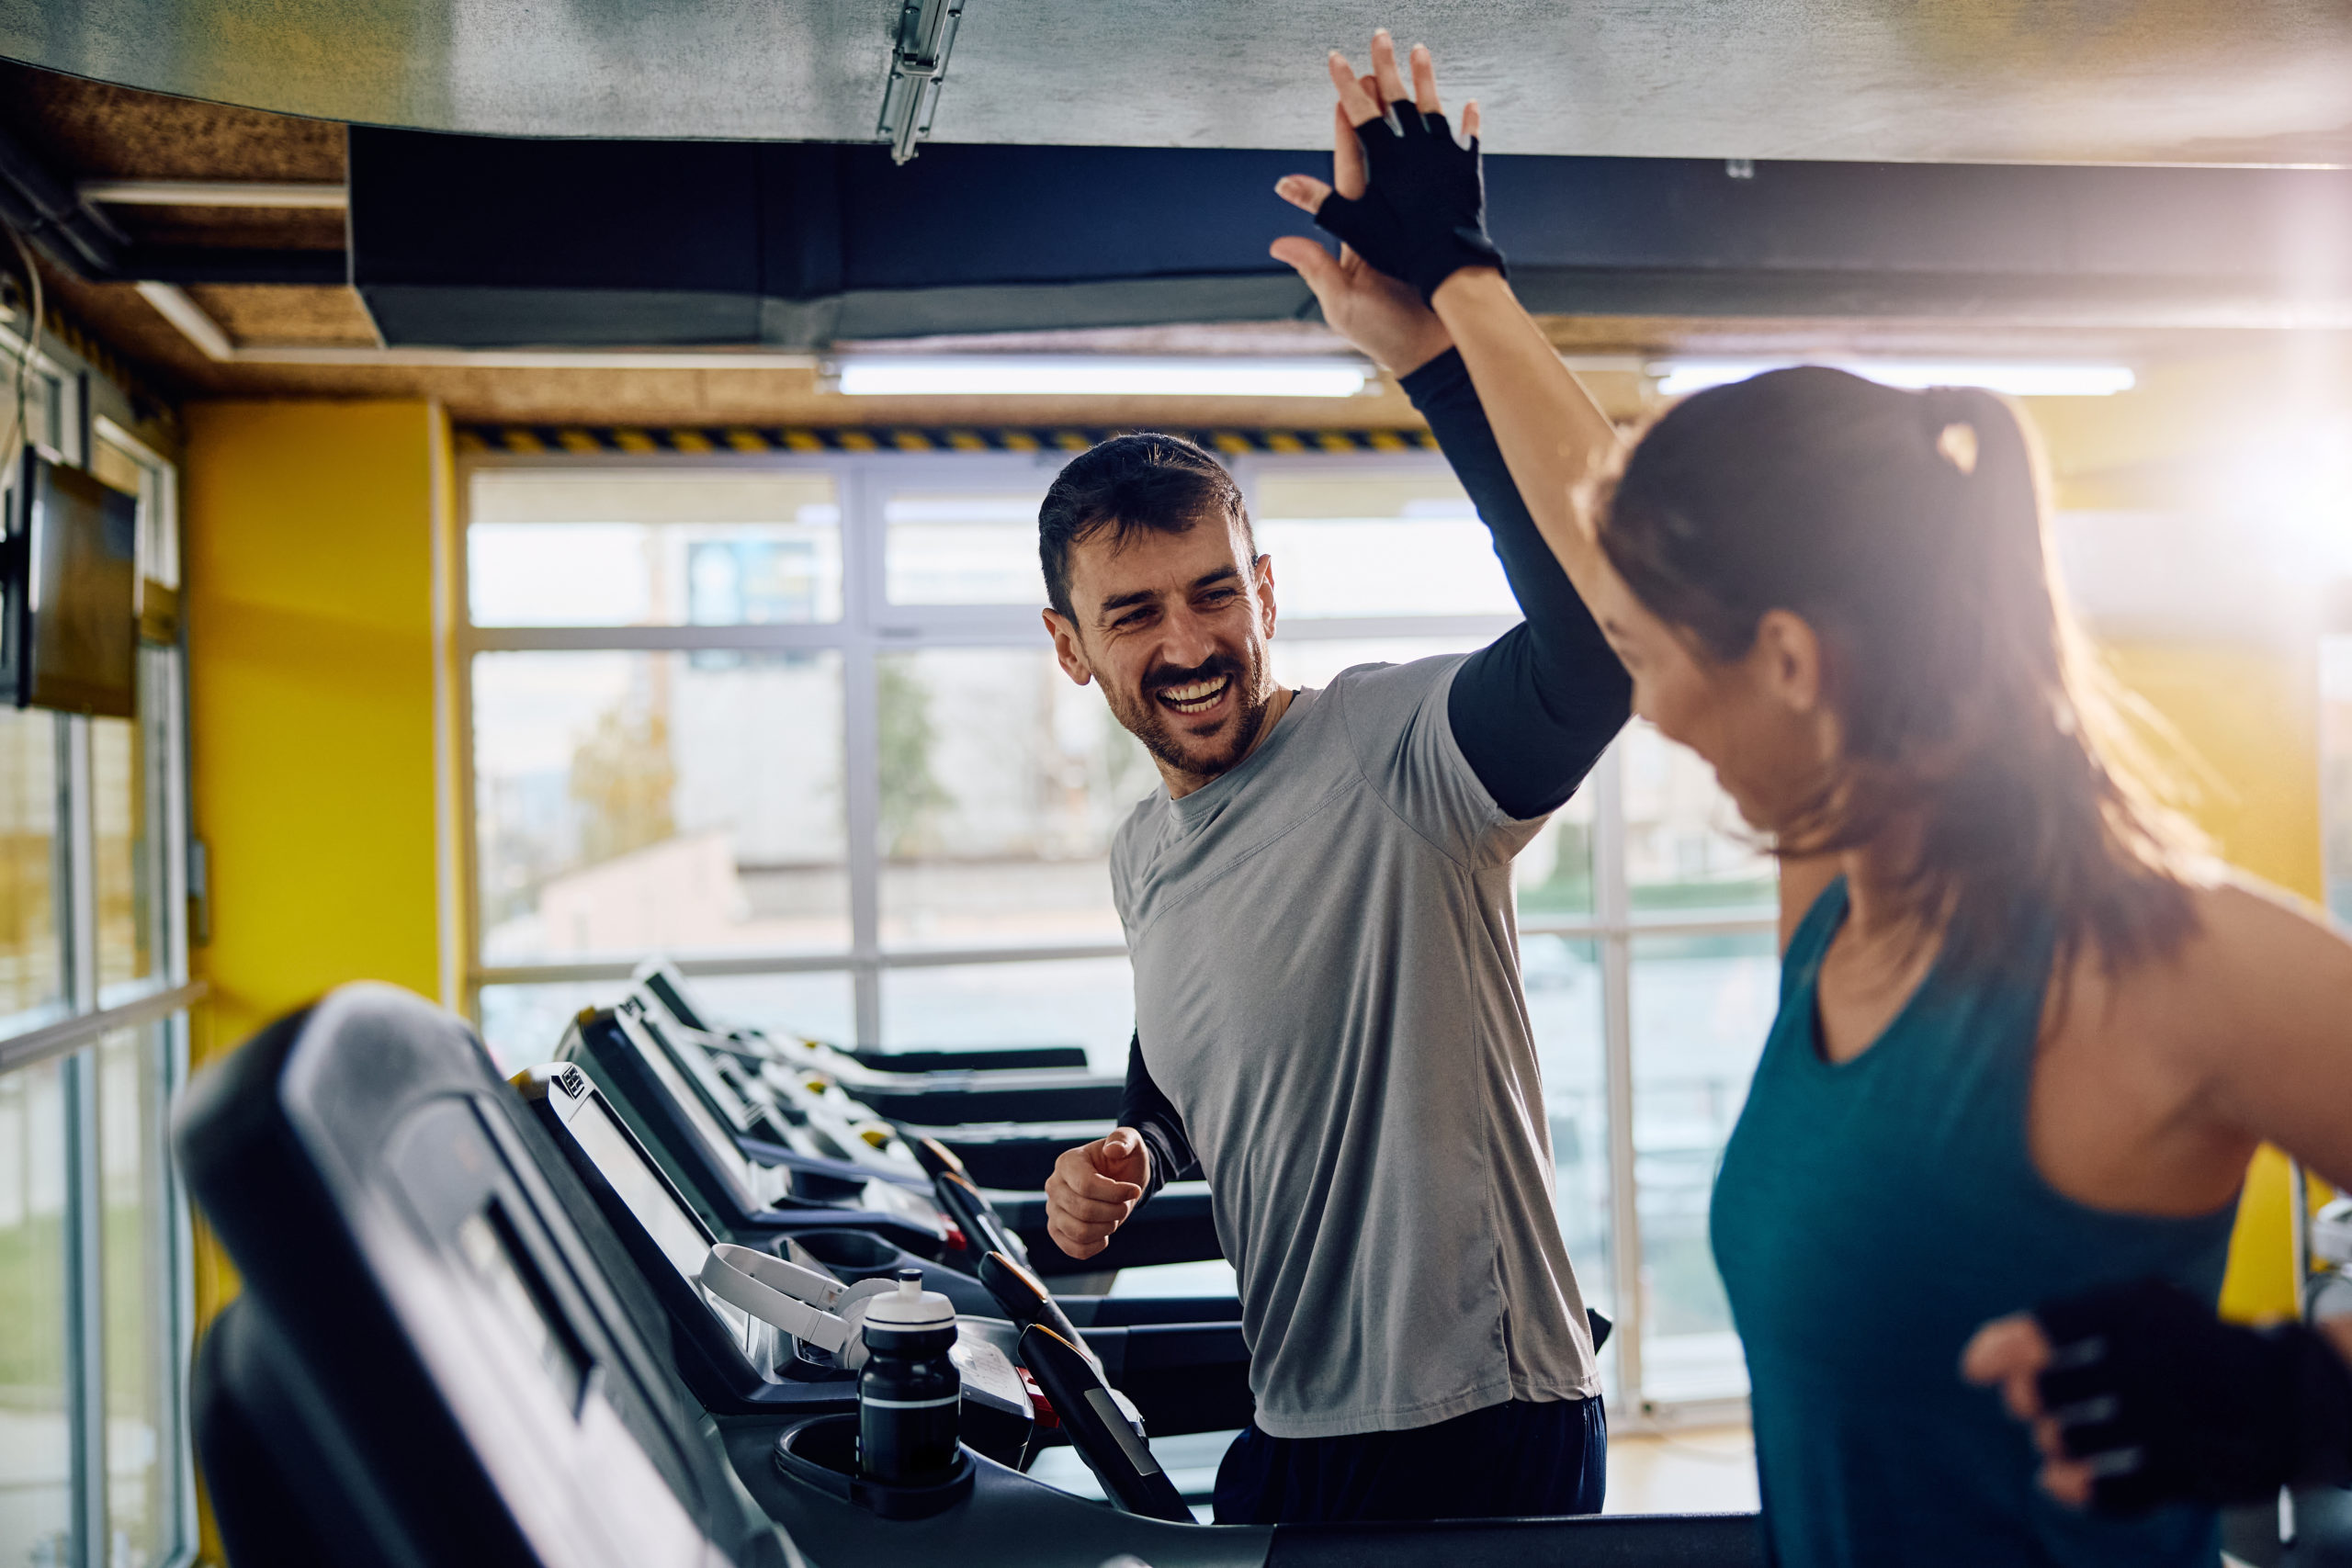 Happy couple giving high five while exercising on treadmill in gym.